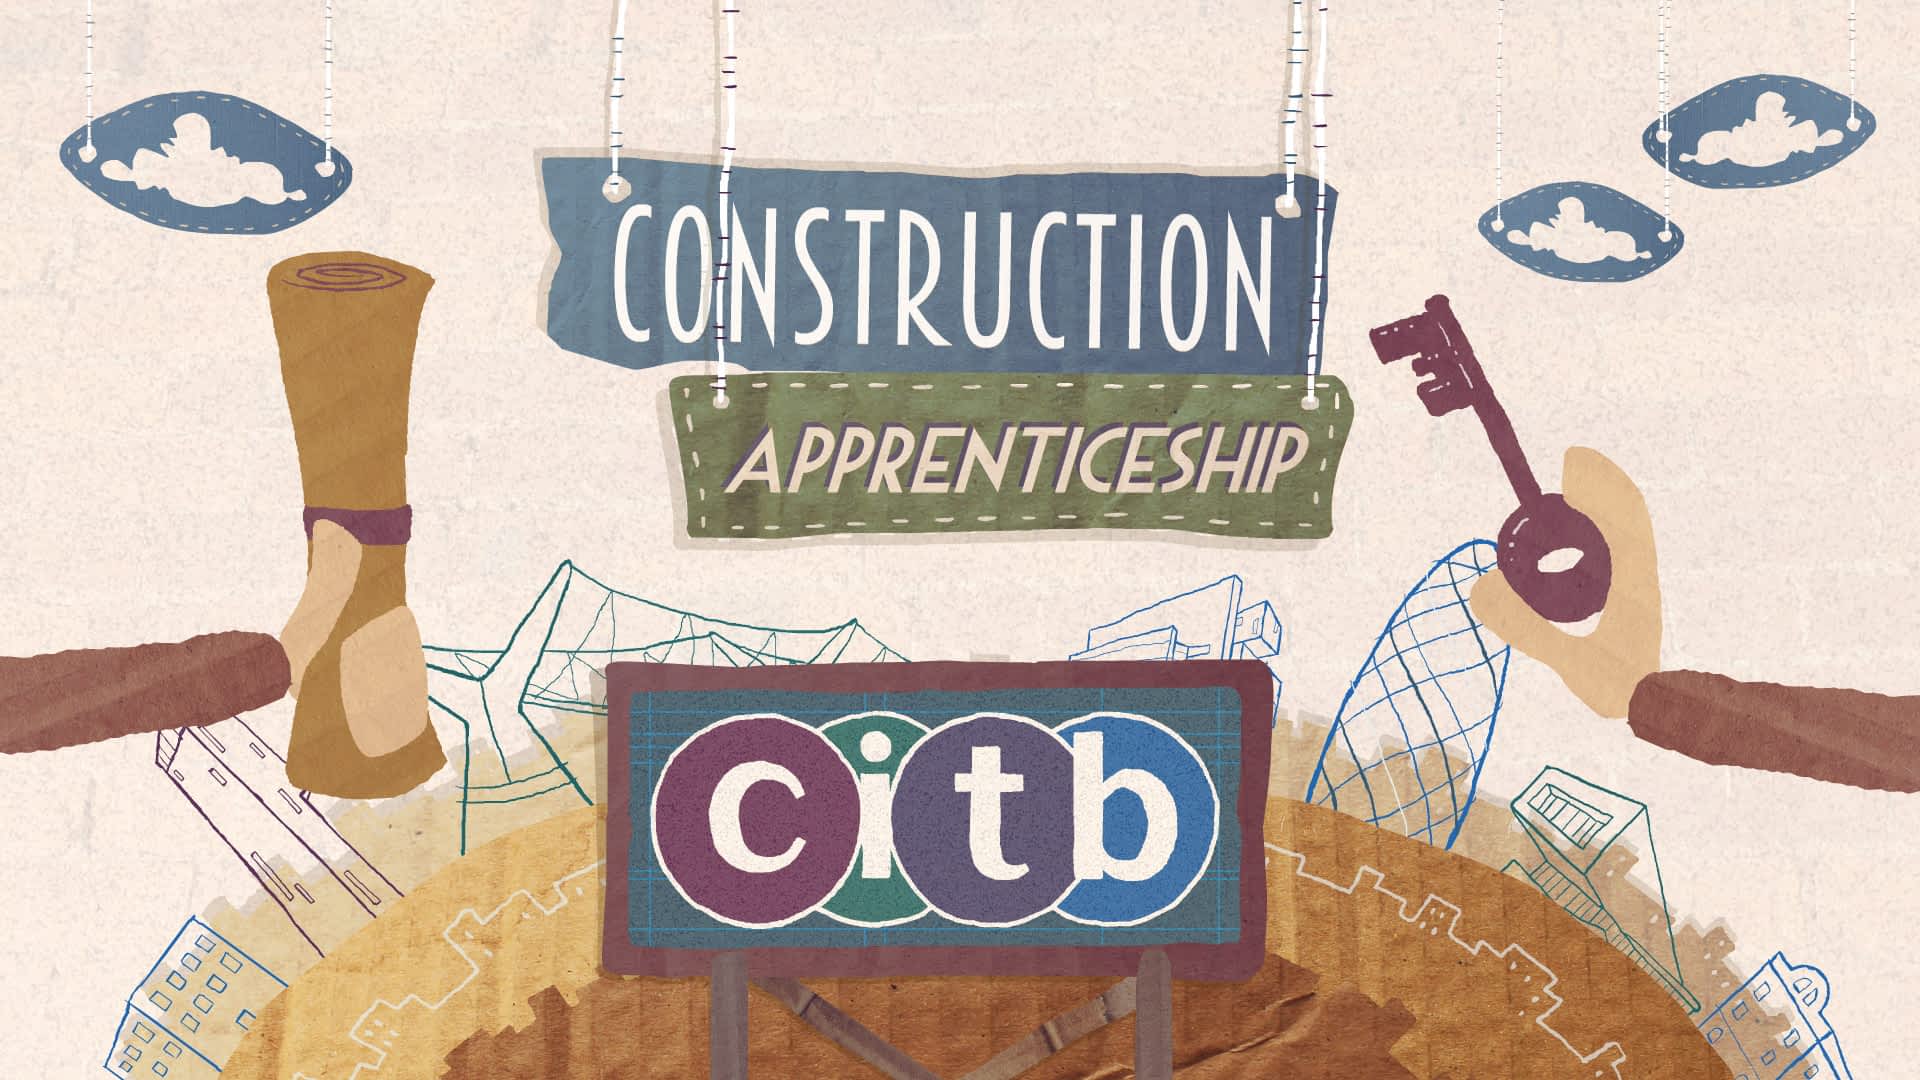 CITB Apprenticeships animation, by Fettle Animation